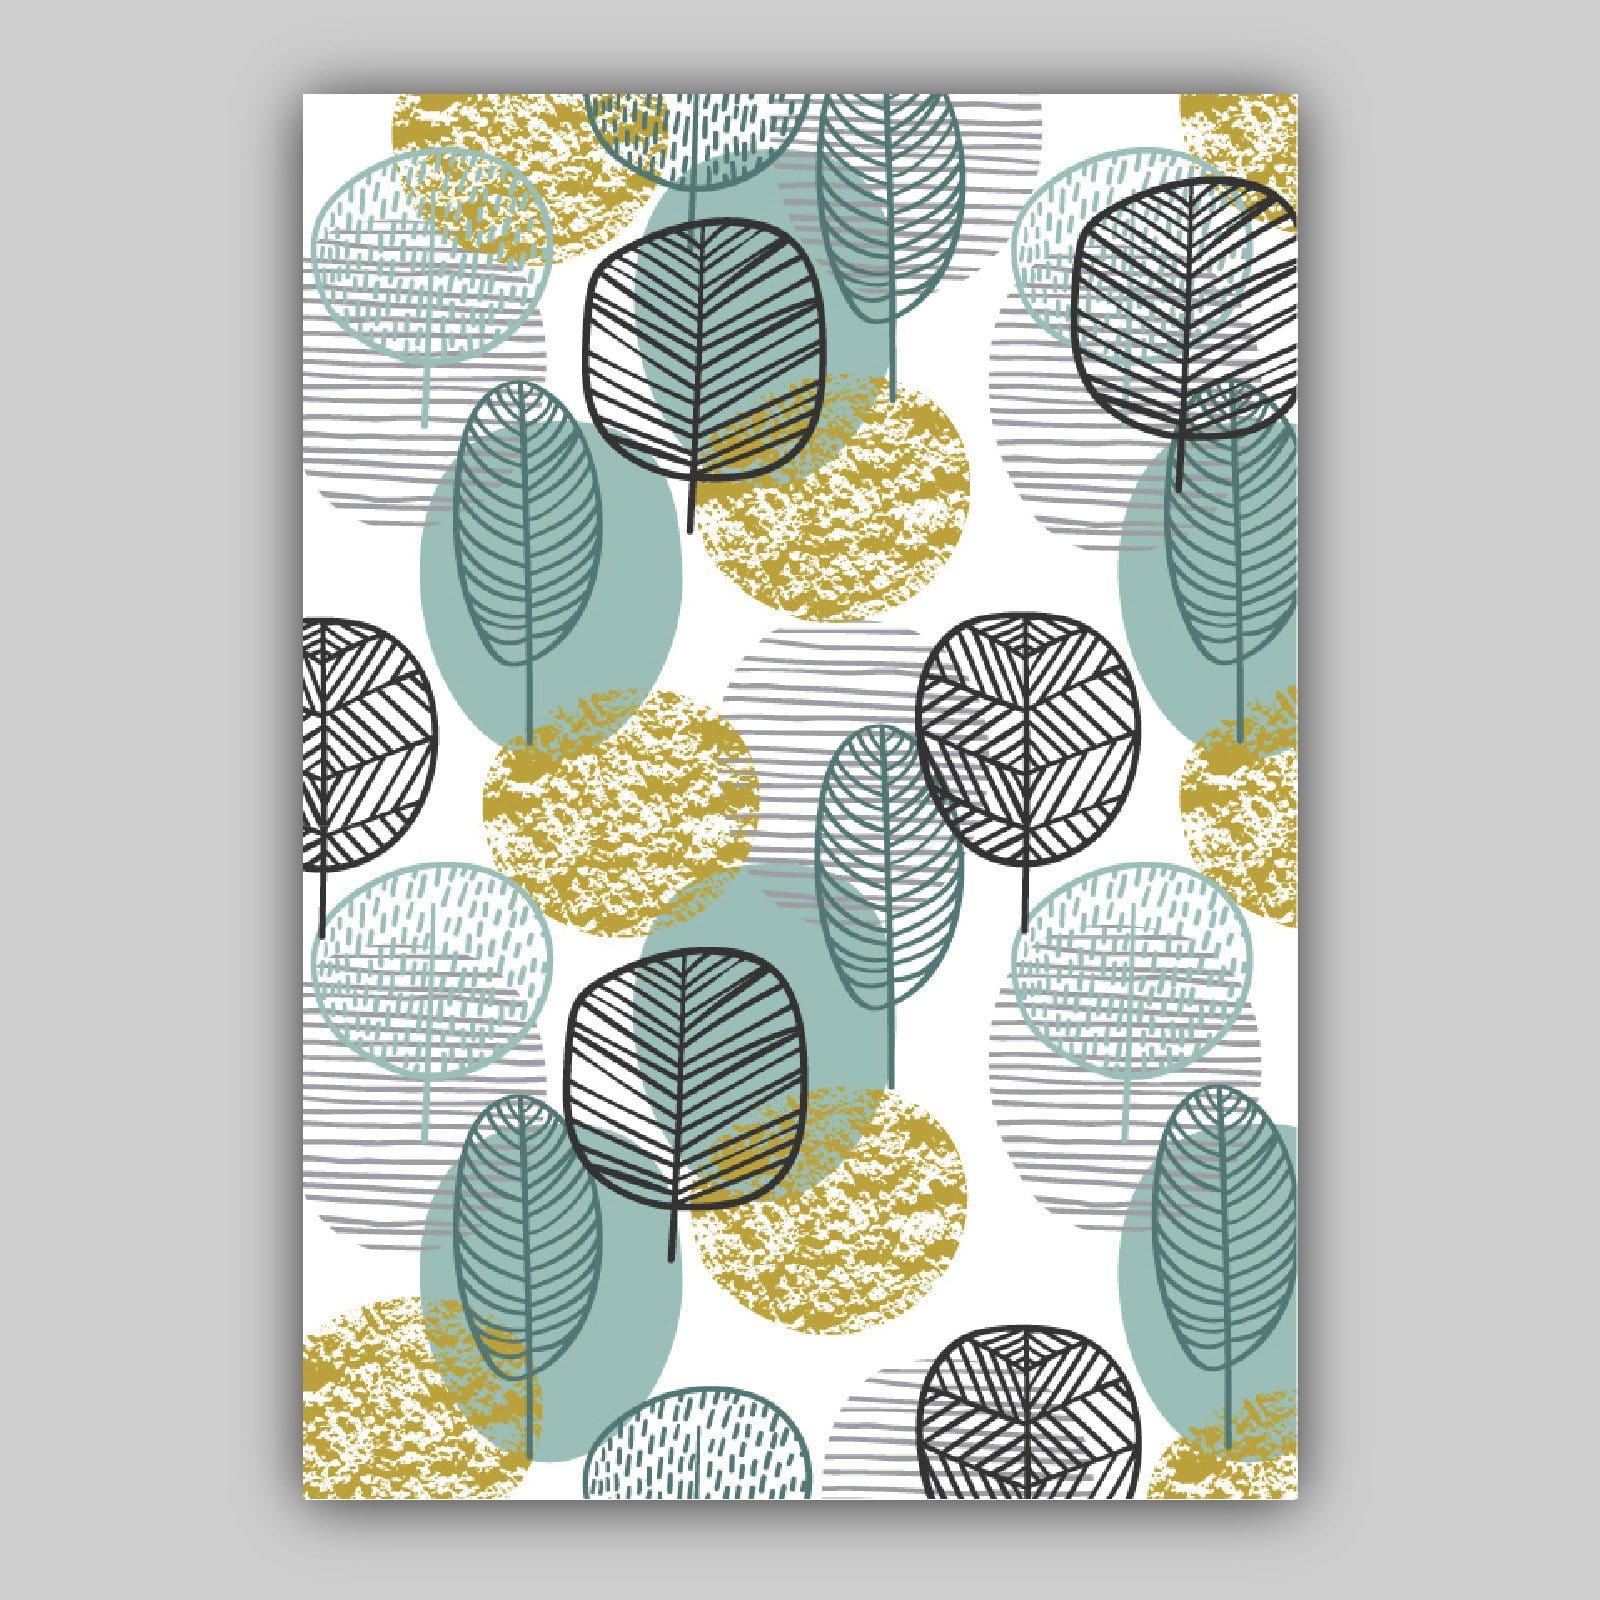 GEOMETRIC set of 3 Blue Yellow & Grey Line Art Prints LEAVES Botanical Circle Wall Pictures Posters Artwork ARTZE